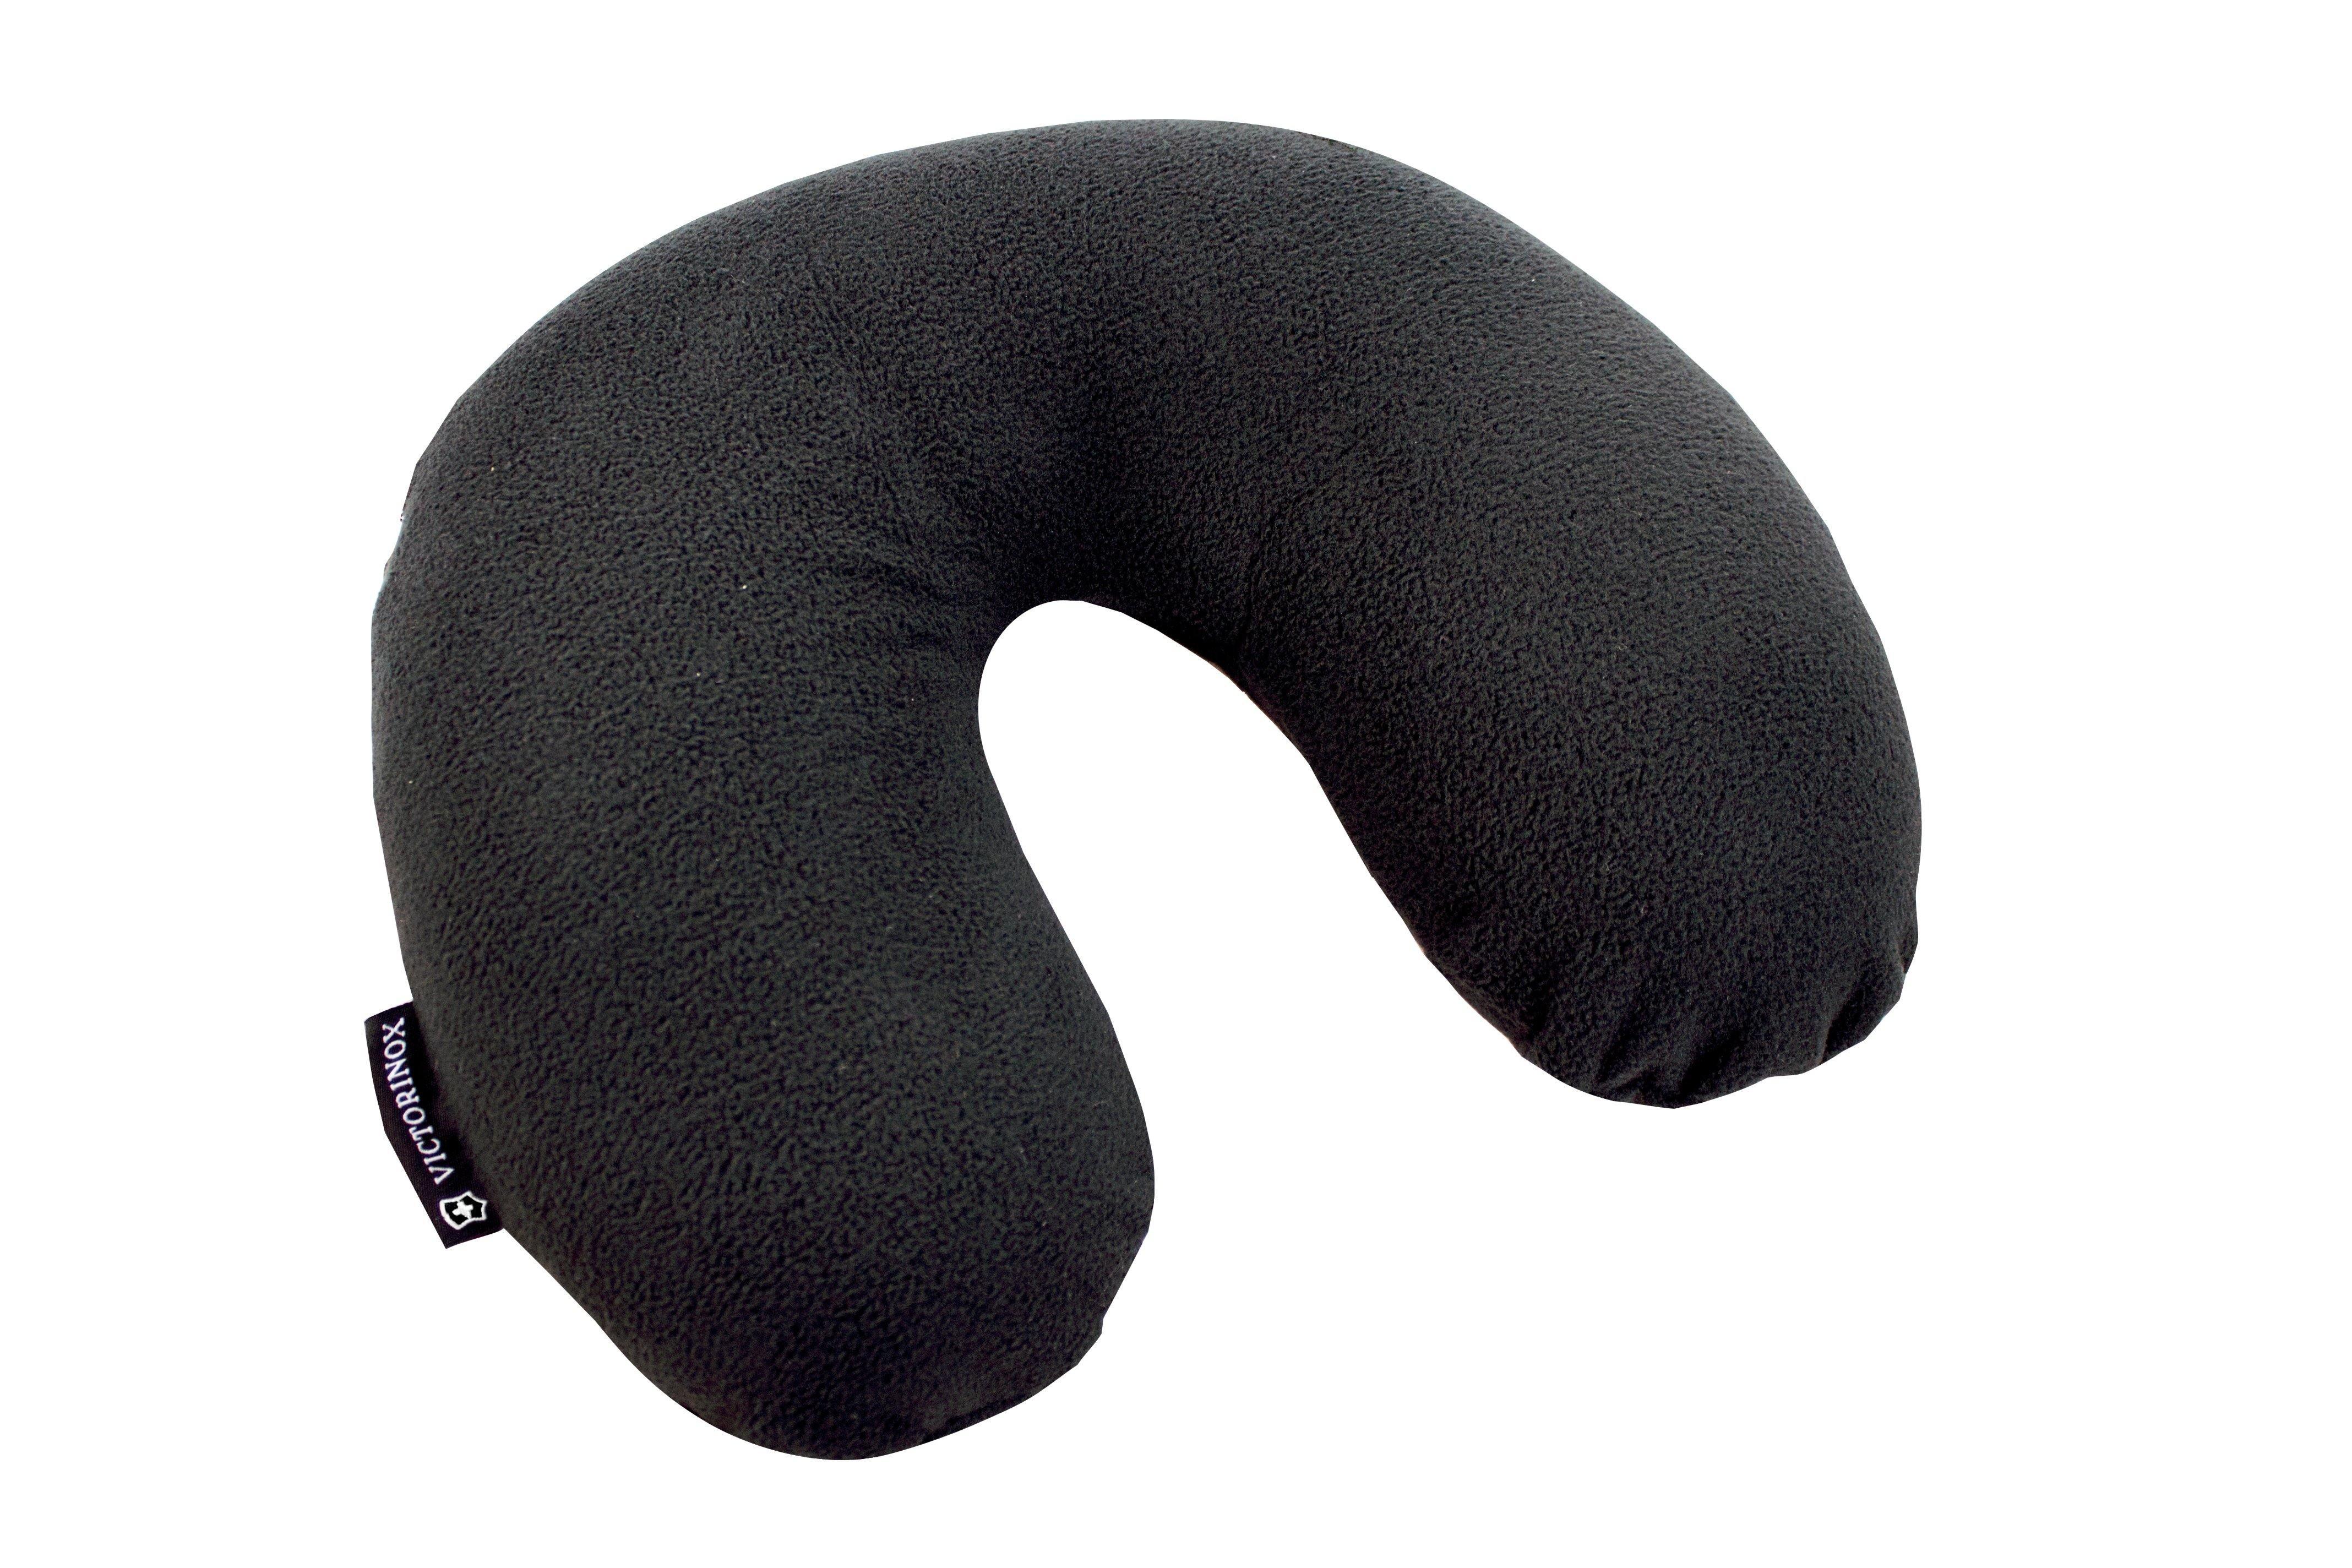 Deluxe Travel Pillow - Voyage Luggage